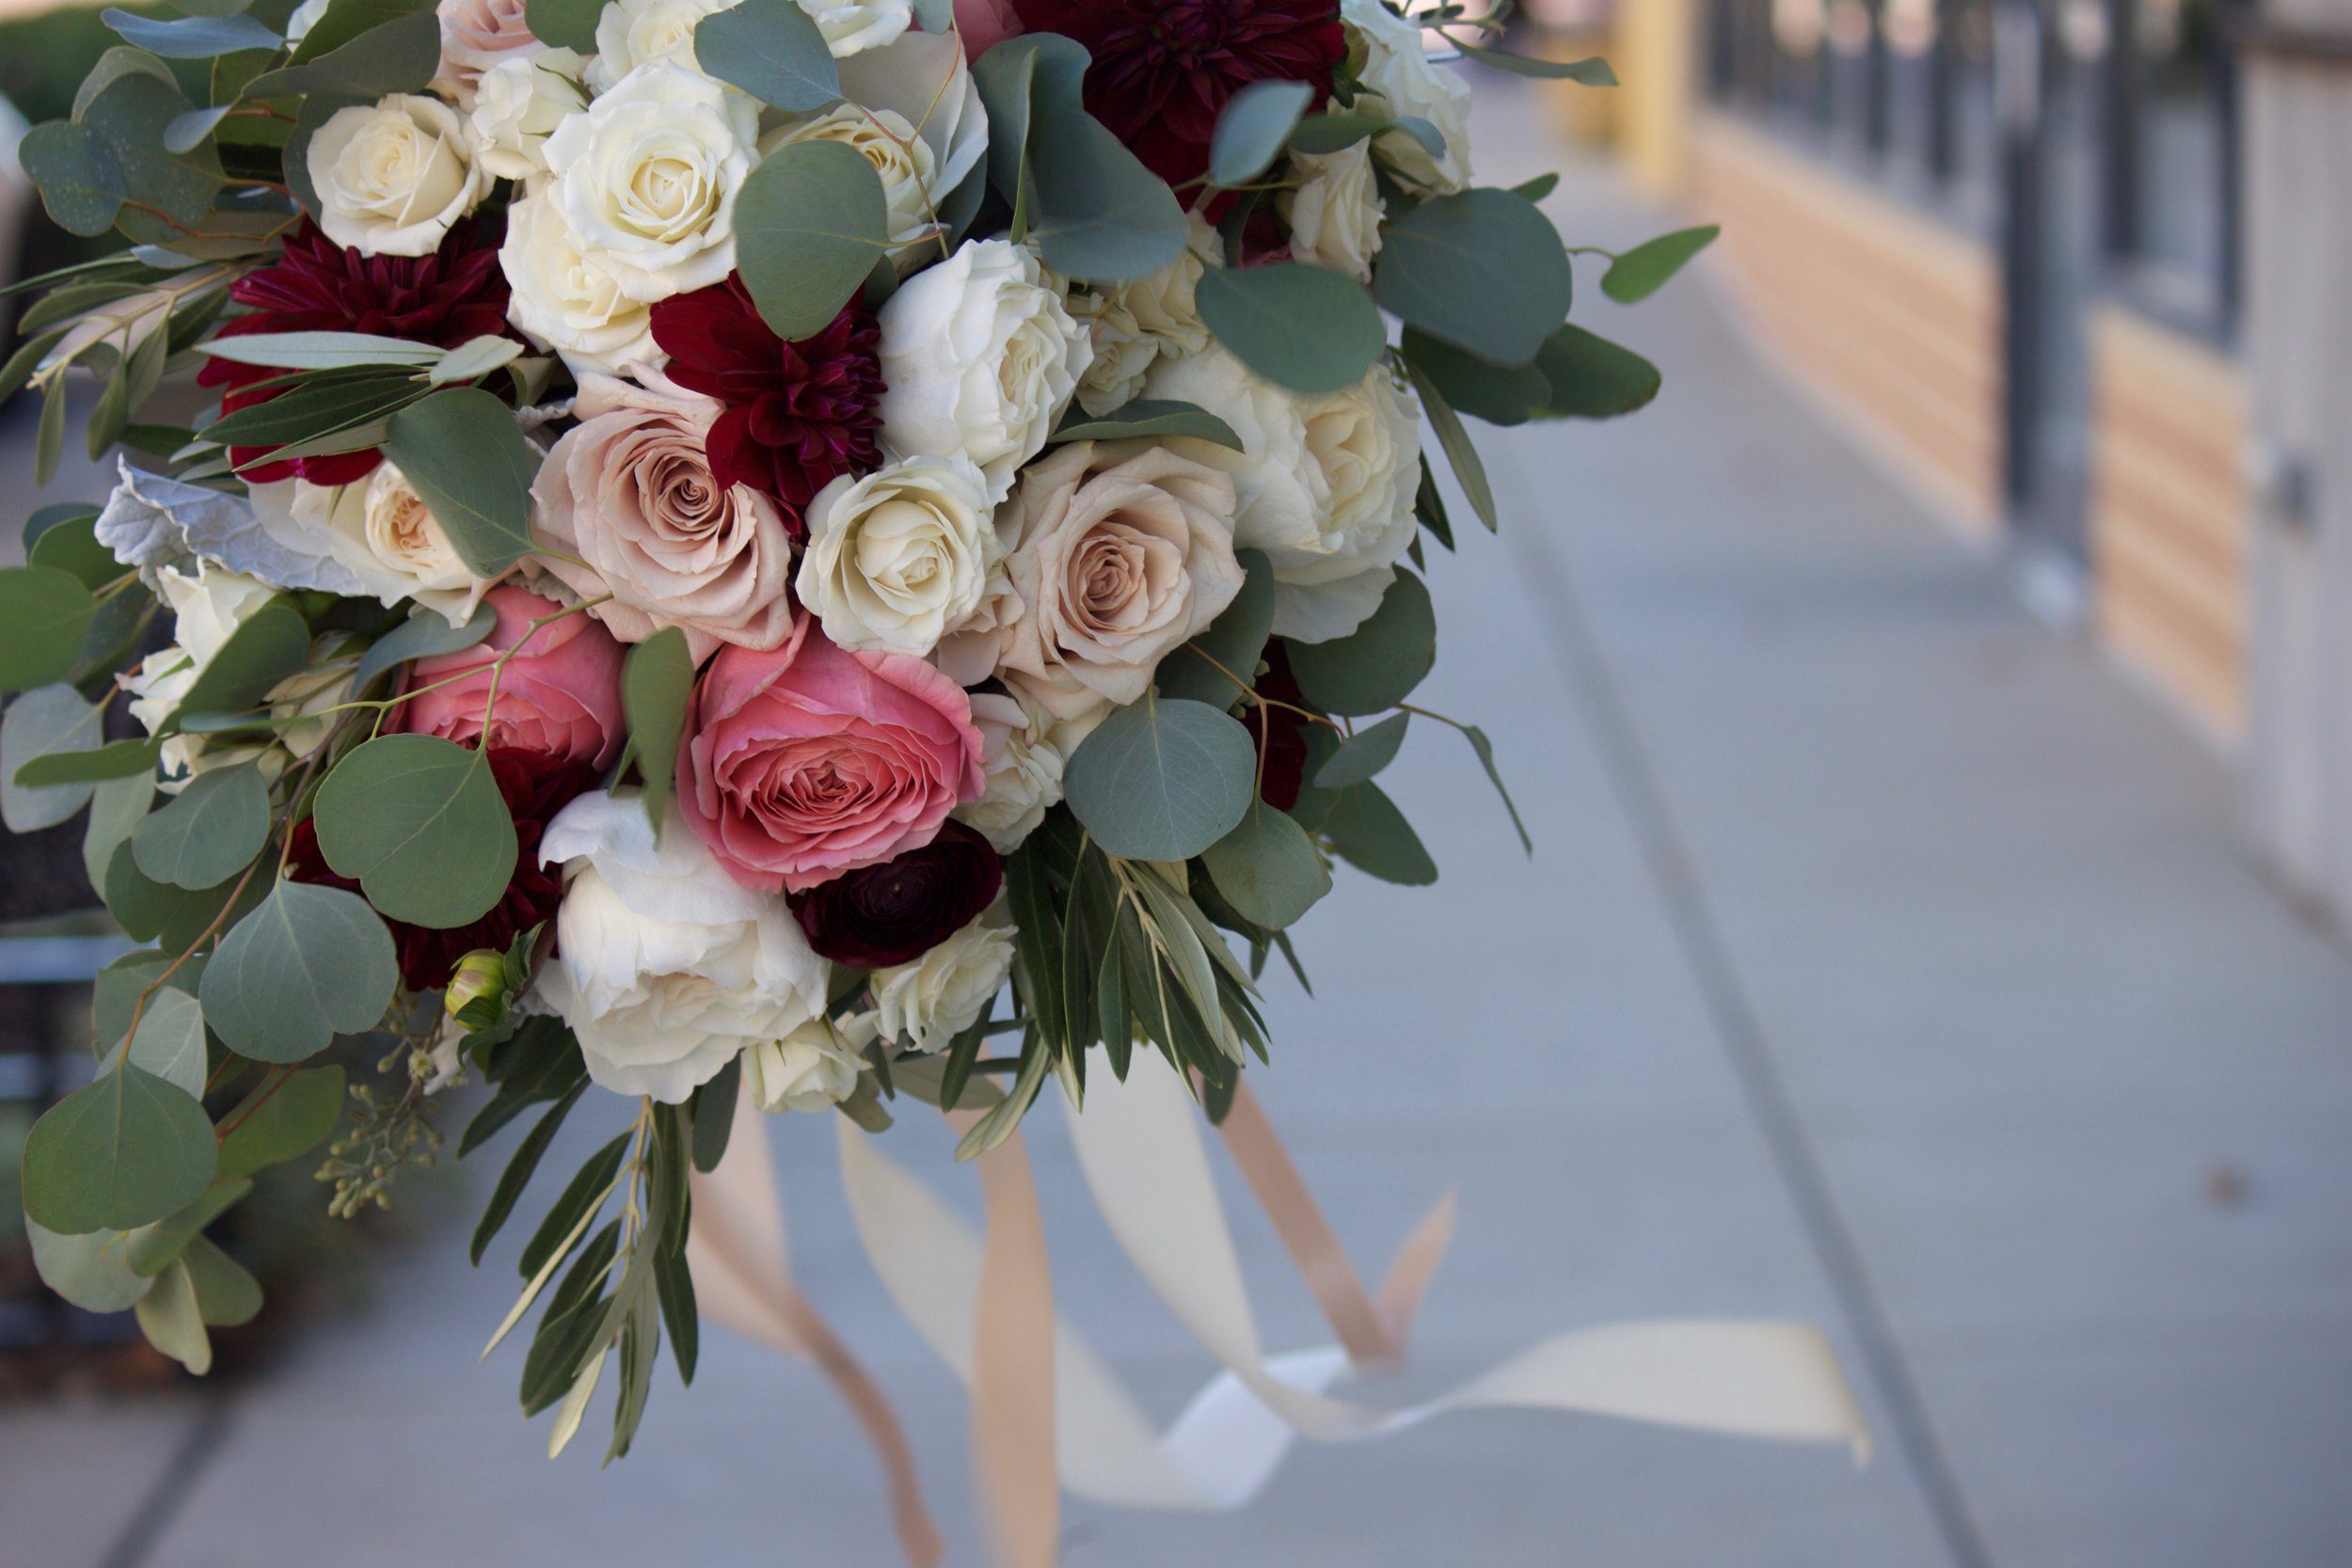 Greeneries are the common element between floral bouquets and "greens-only" accents.